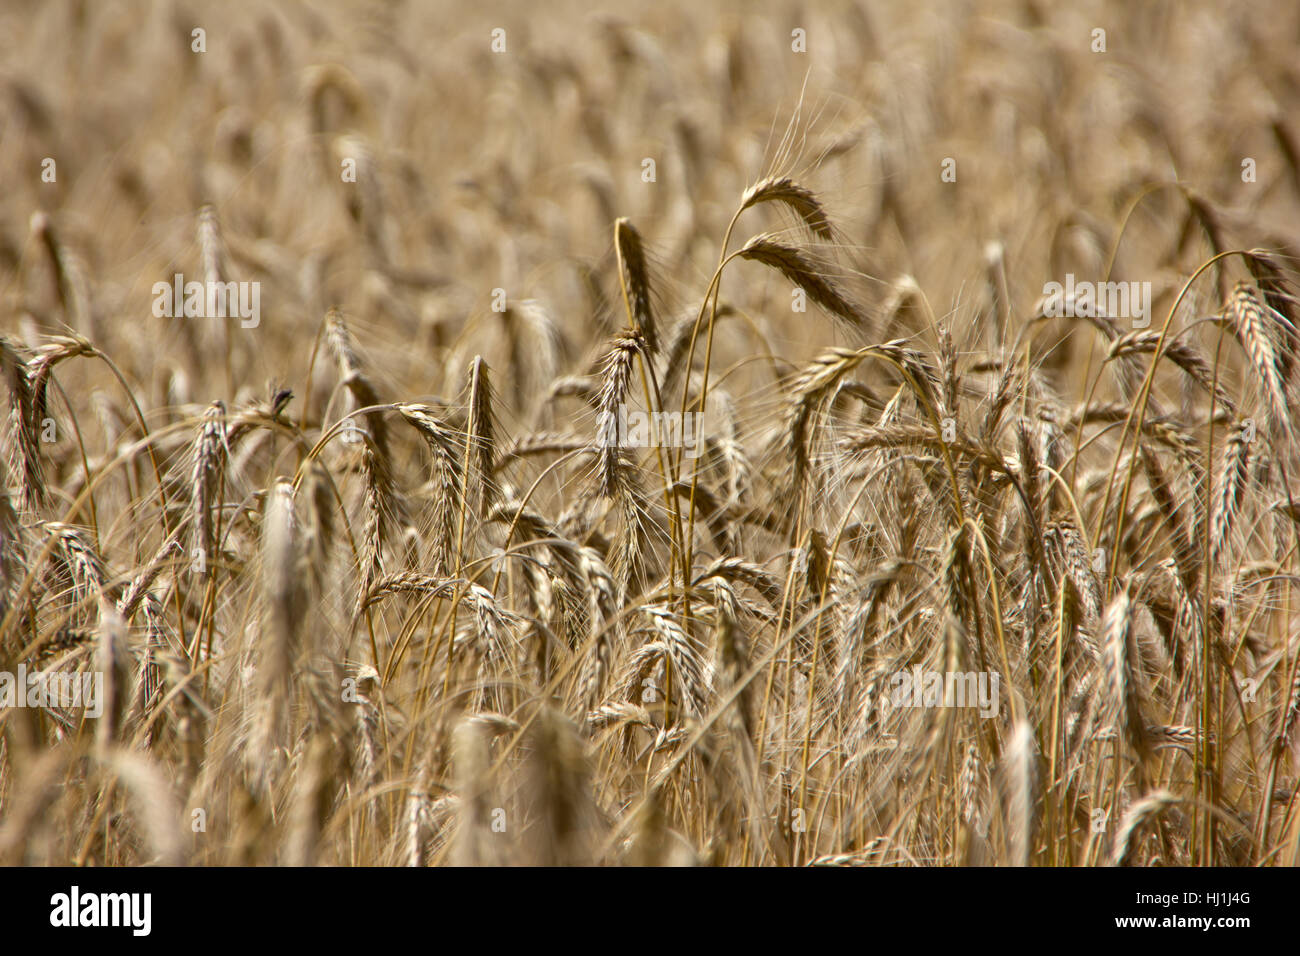 health, agriculture, farming, field, grain, harvest, rye, crops, cereal, Stock Photo